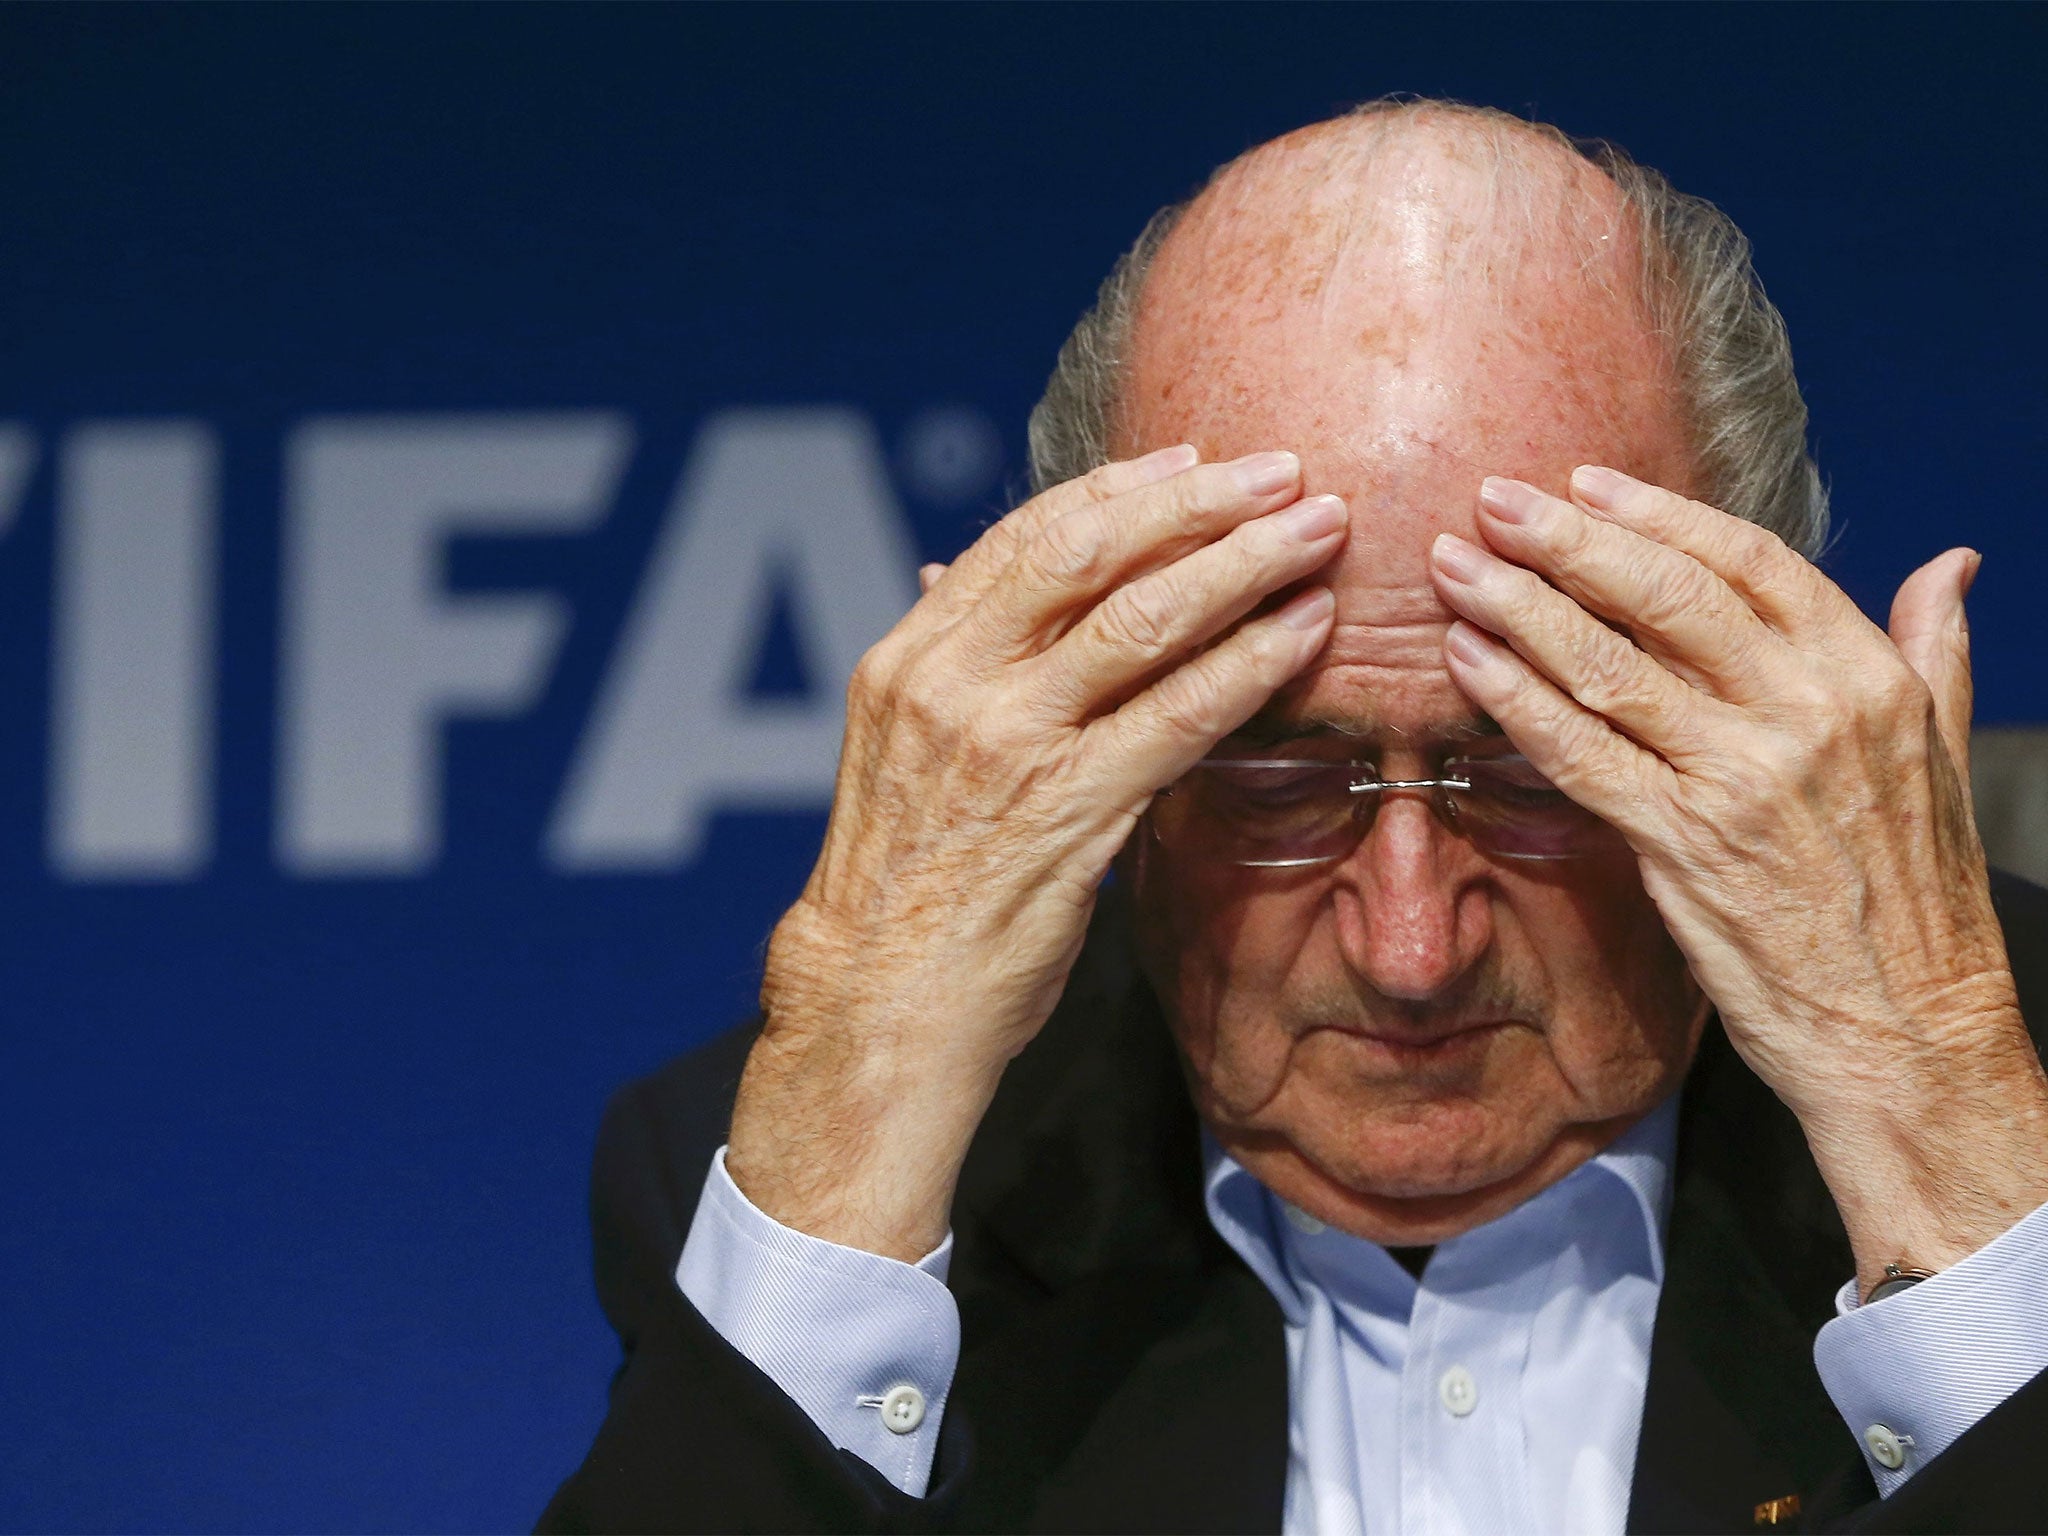 The Swiss Attorney General has said Sepp Blatter may be questioned